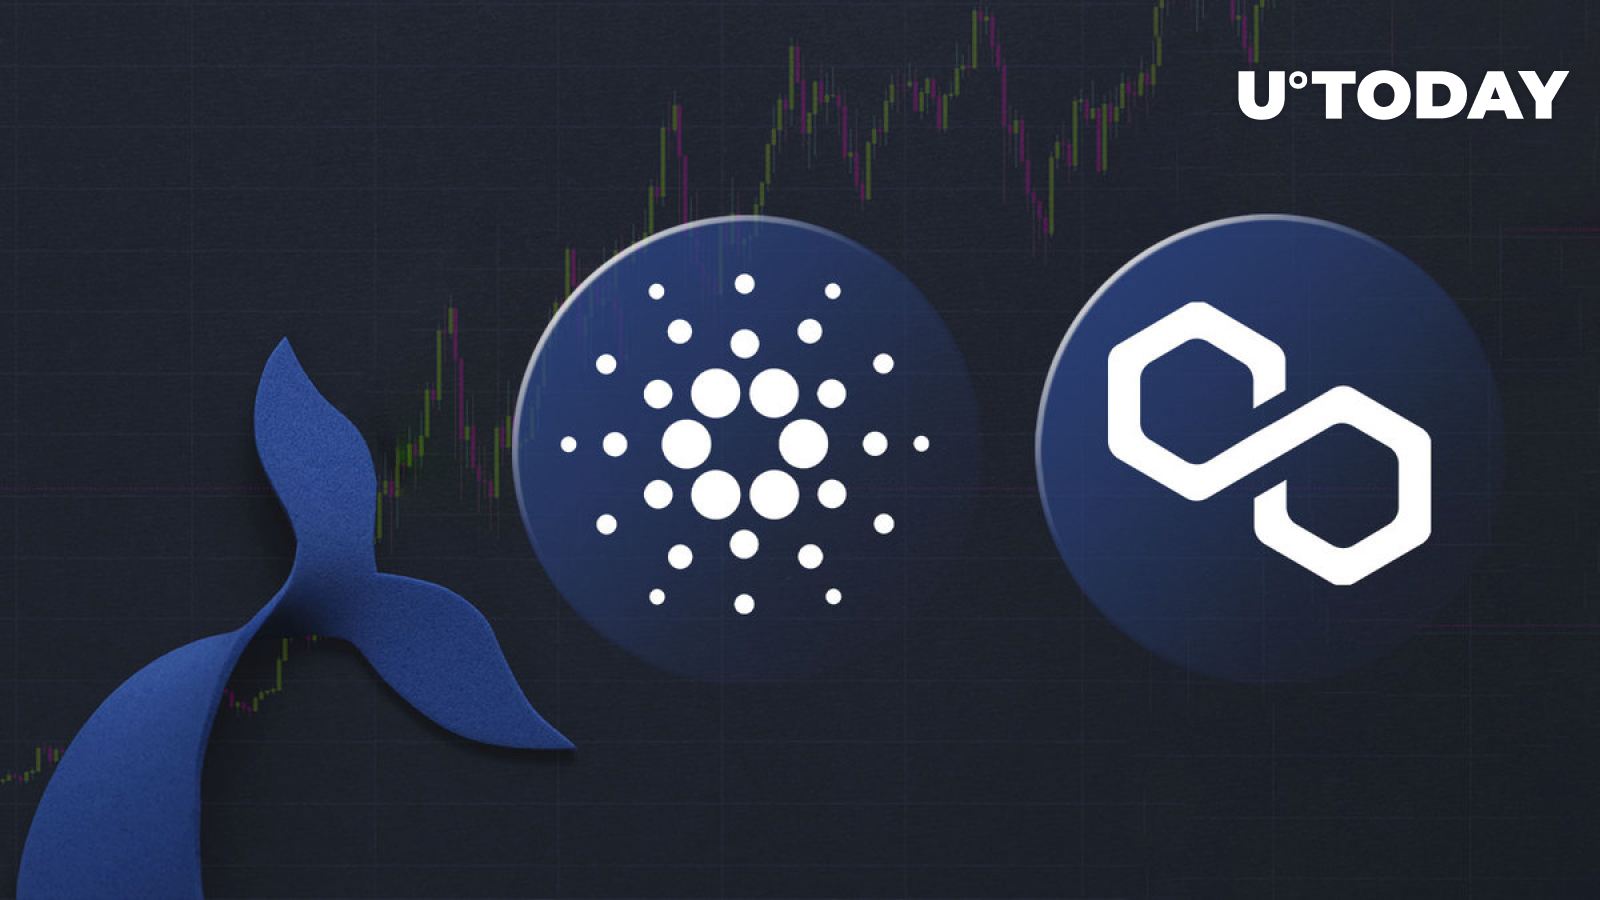 Cardano (ADA) and Polygon (MATIC): Why Are Whales So Interested in These Cryptocurrencies?